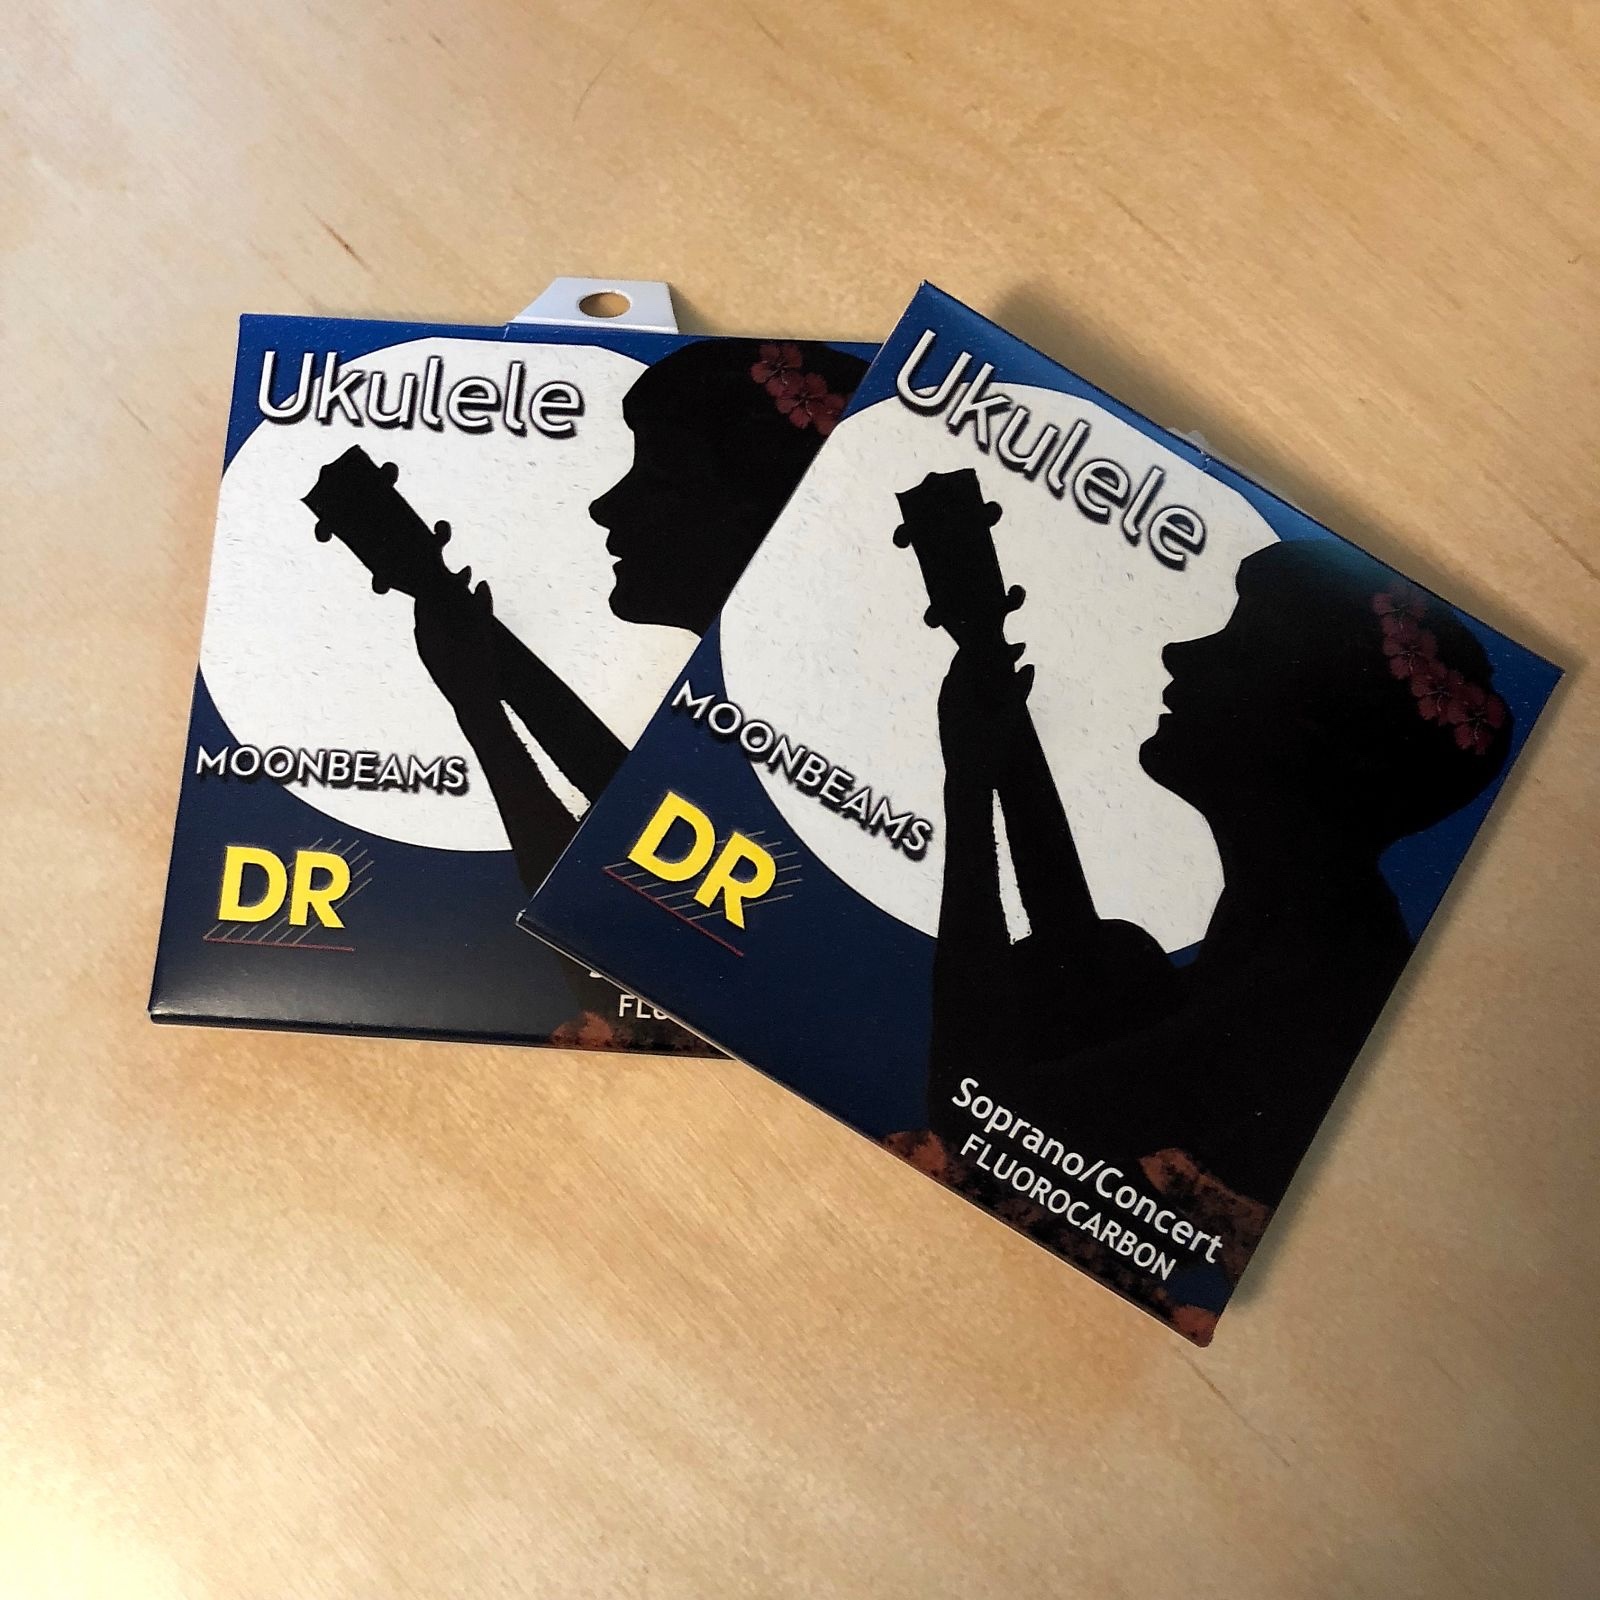 2x (two sets) DR Moonbeams Soprano/Concert Ukulele Strings, Clear Fluorocarbon